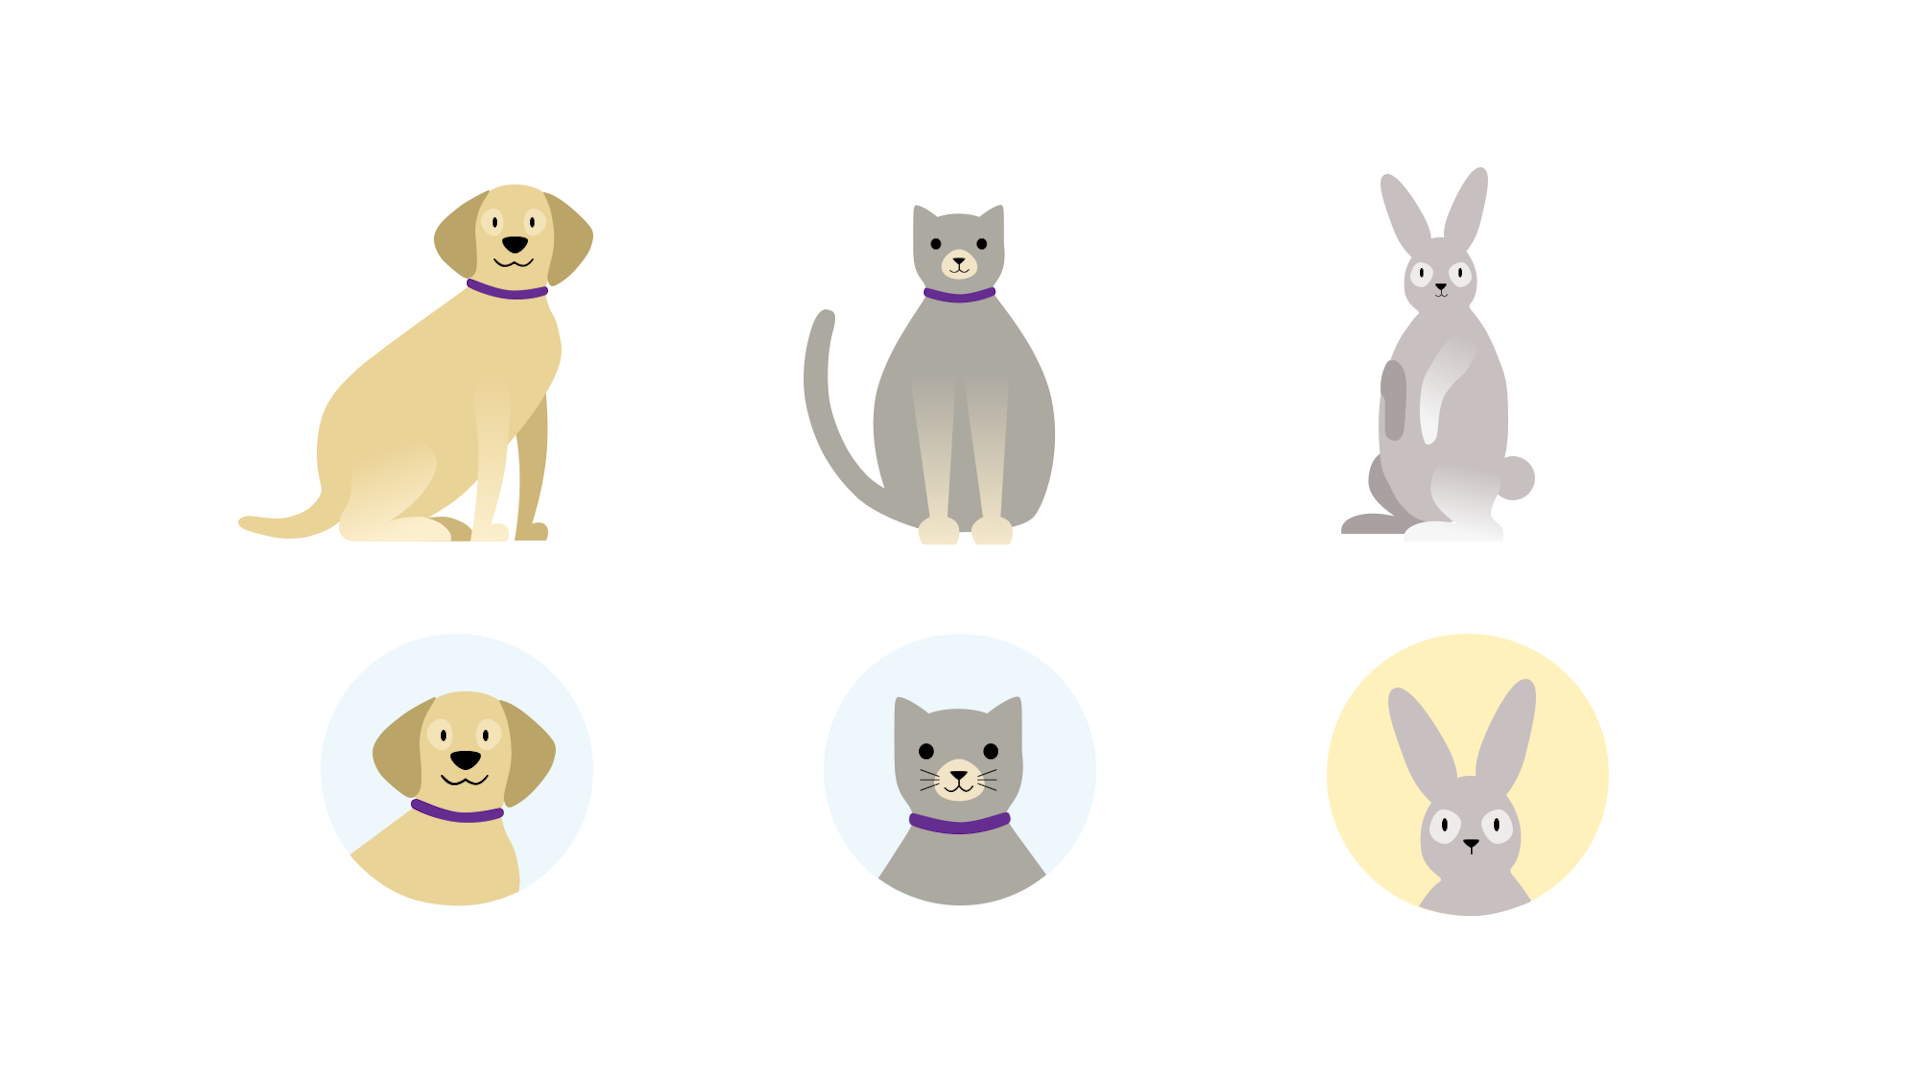 Rounded illustrations of a dog, cat and rabbit, with the row below showing their faces framed on blue and yellow circular backgrounds.